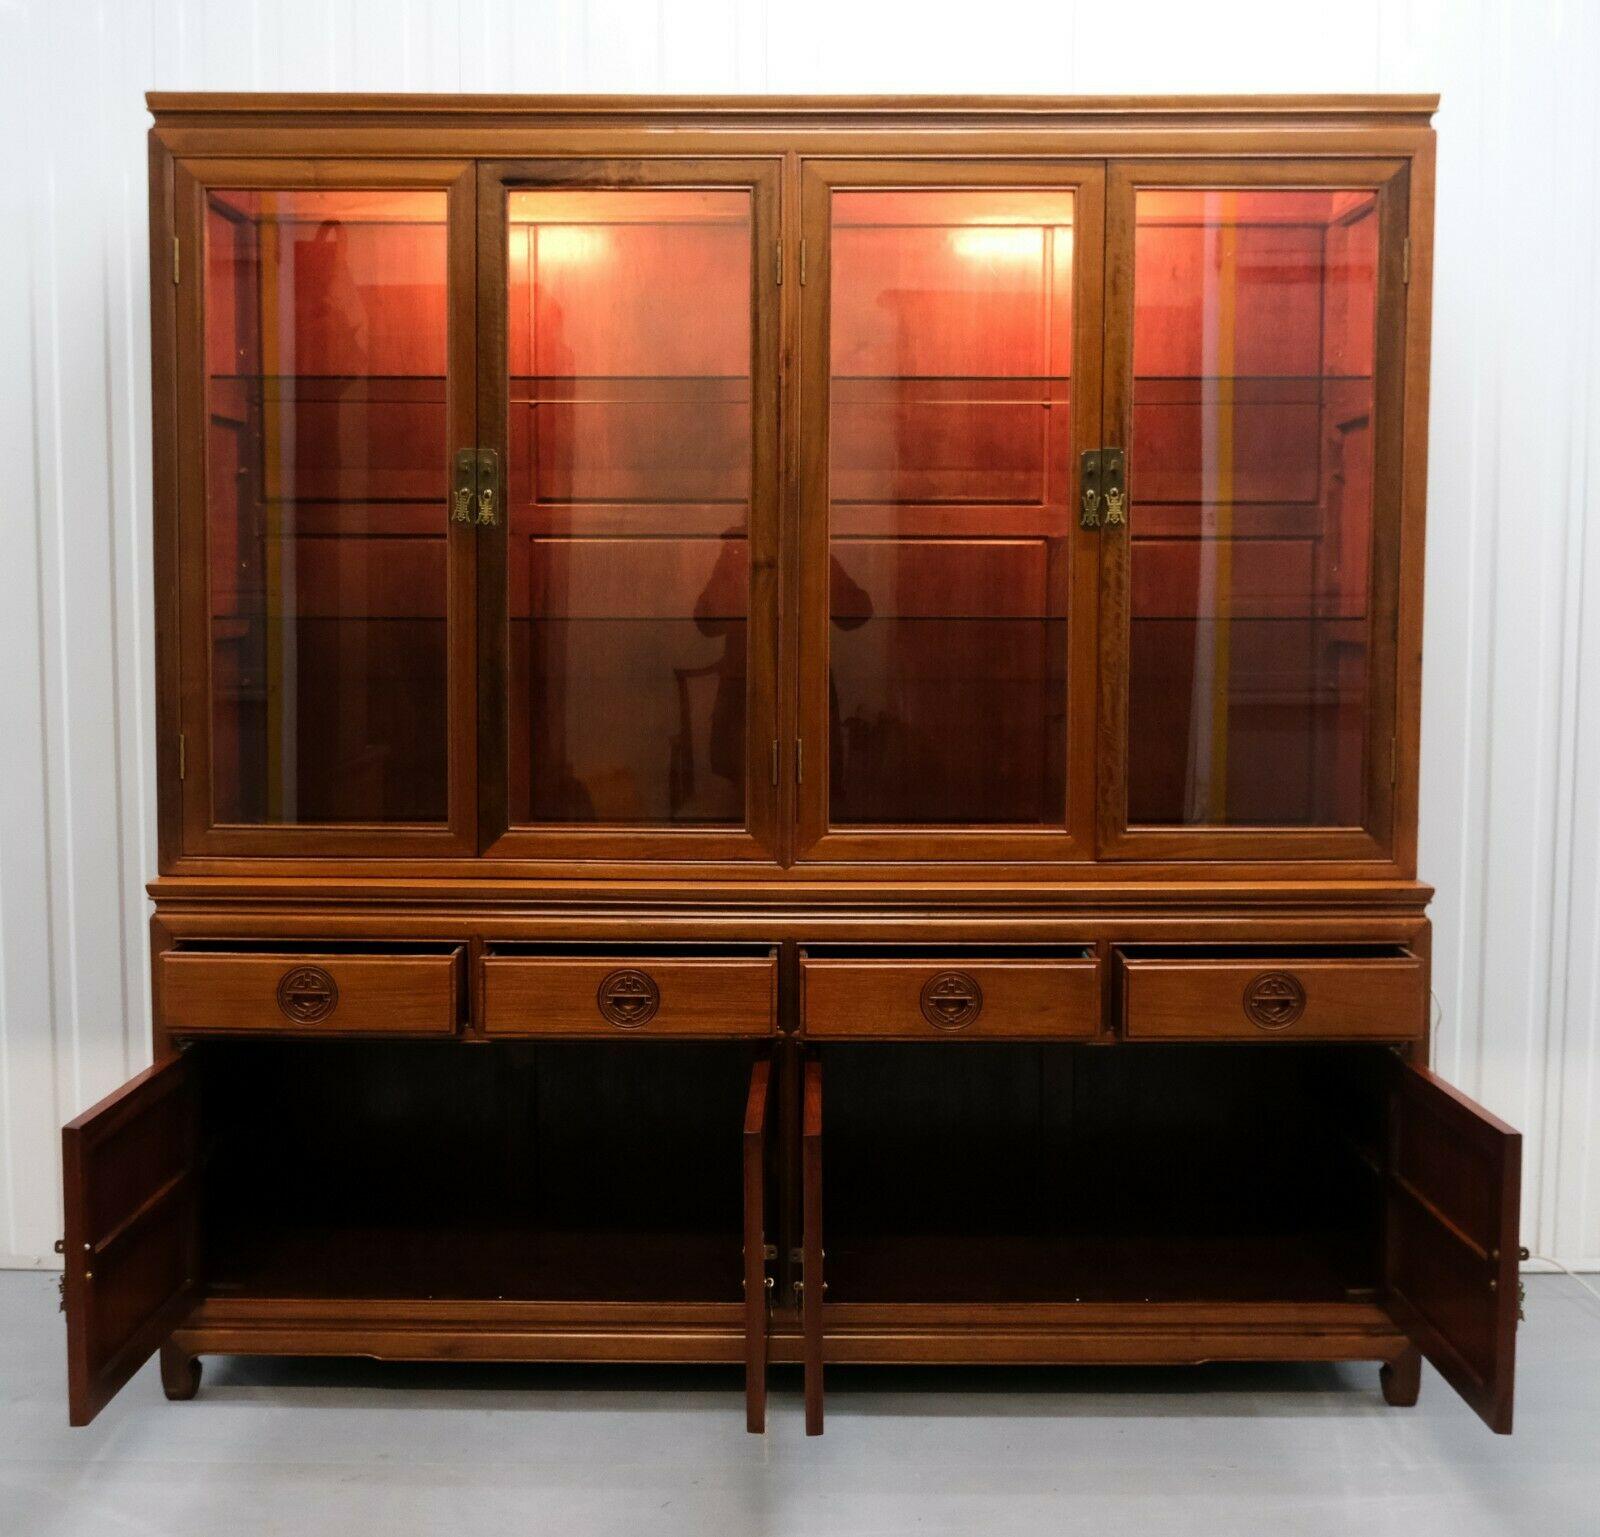 Chinese Chippendale Stunning Chinese Hardwood Sideboard with Glass Shelves Carving Details & Lights